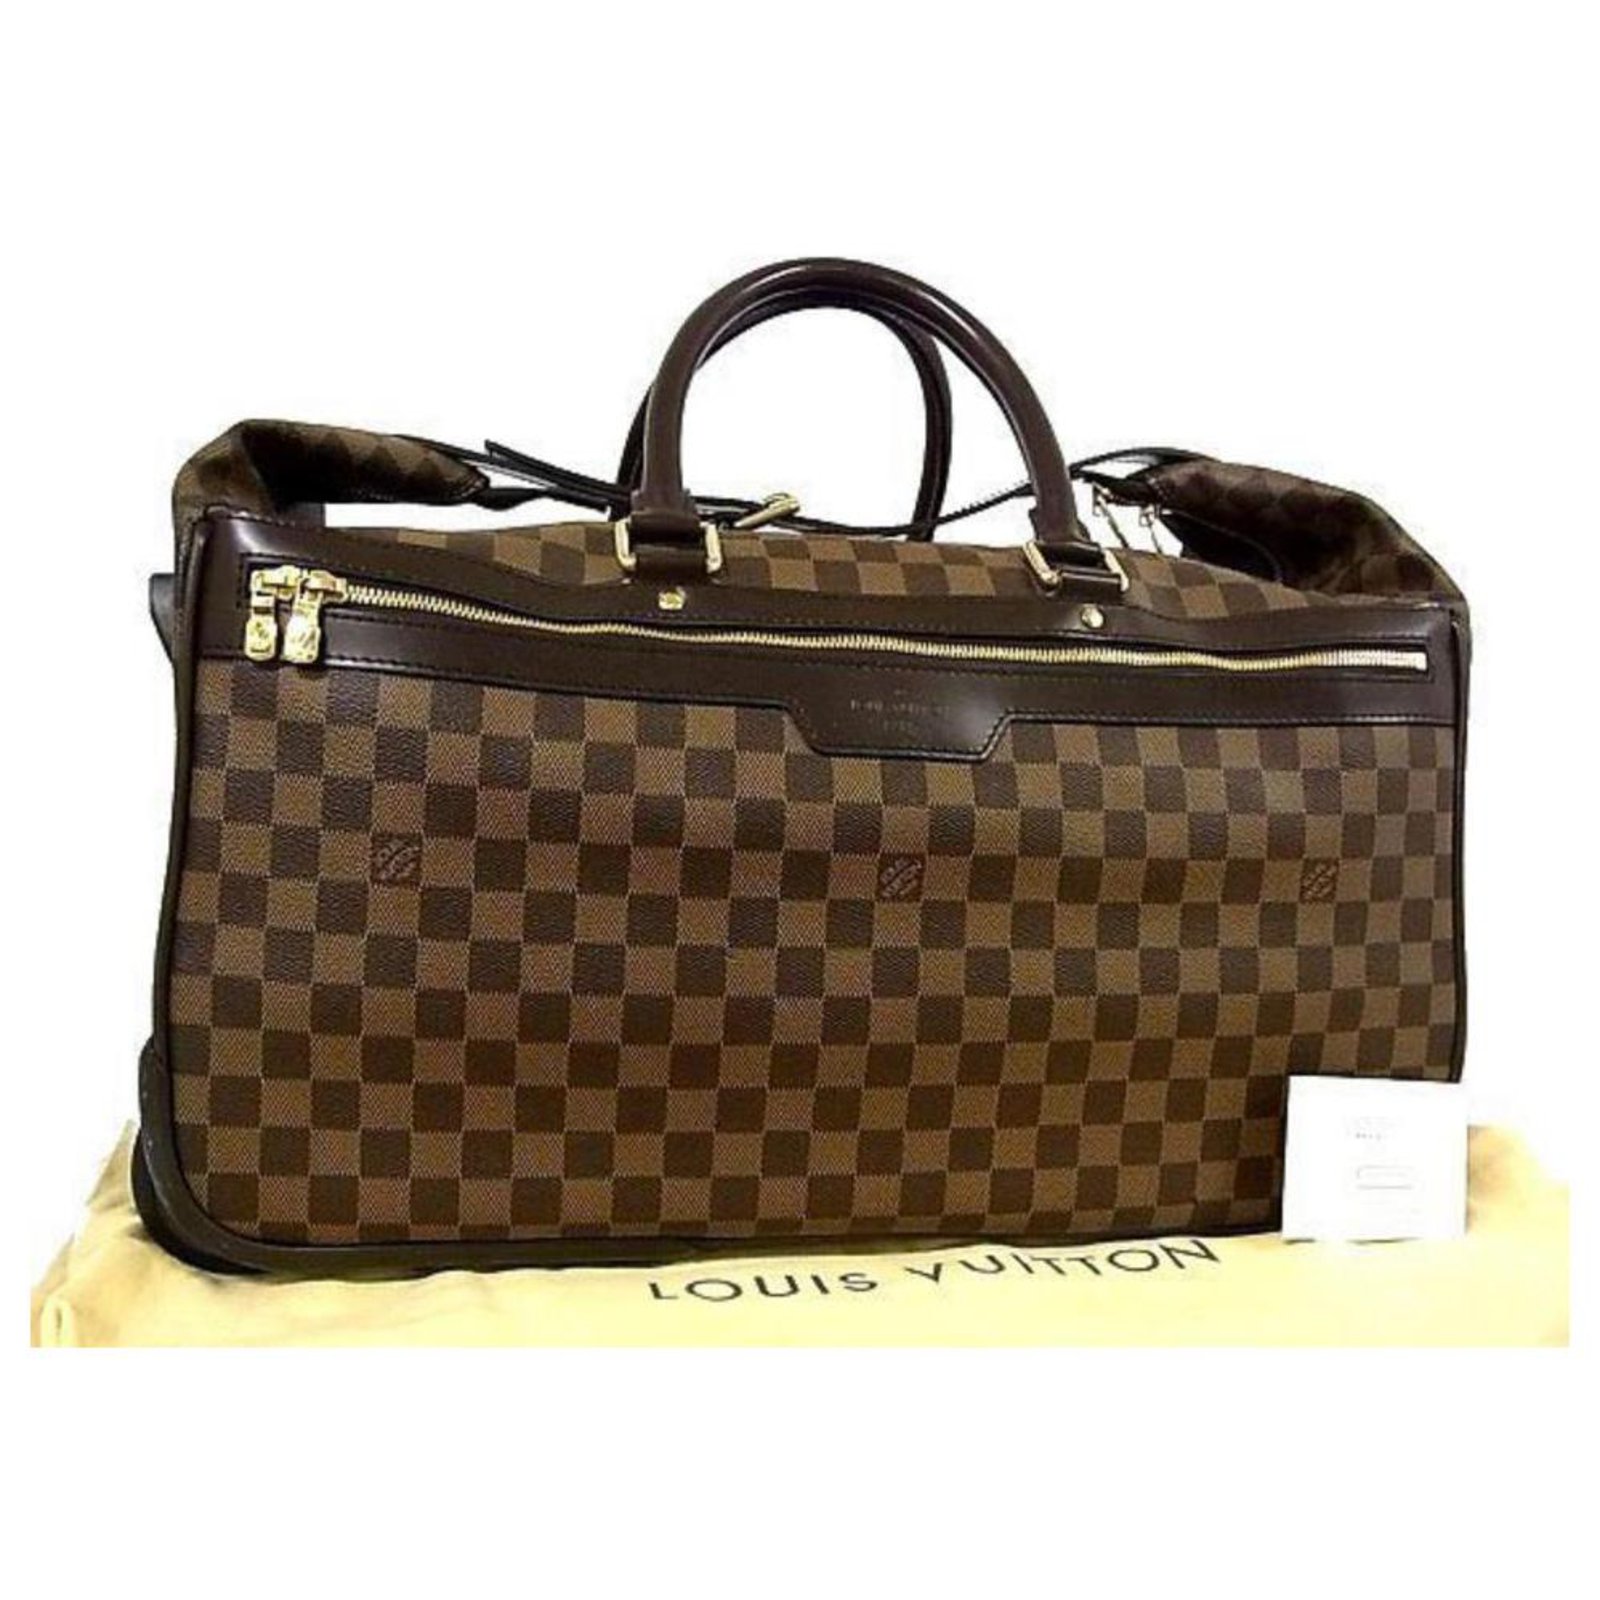 Vuitton Carry On 